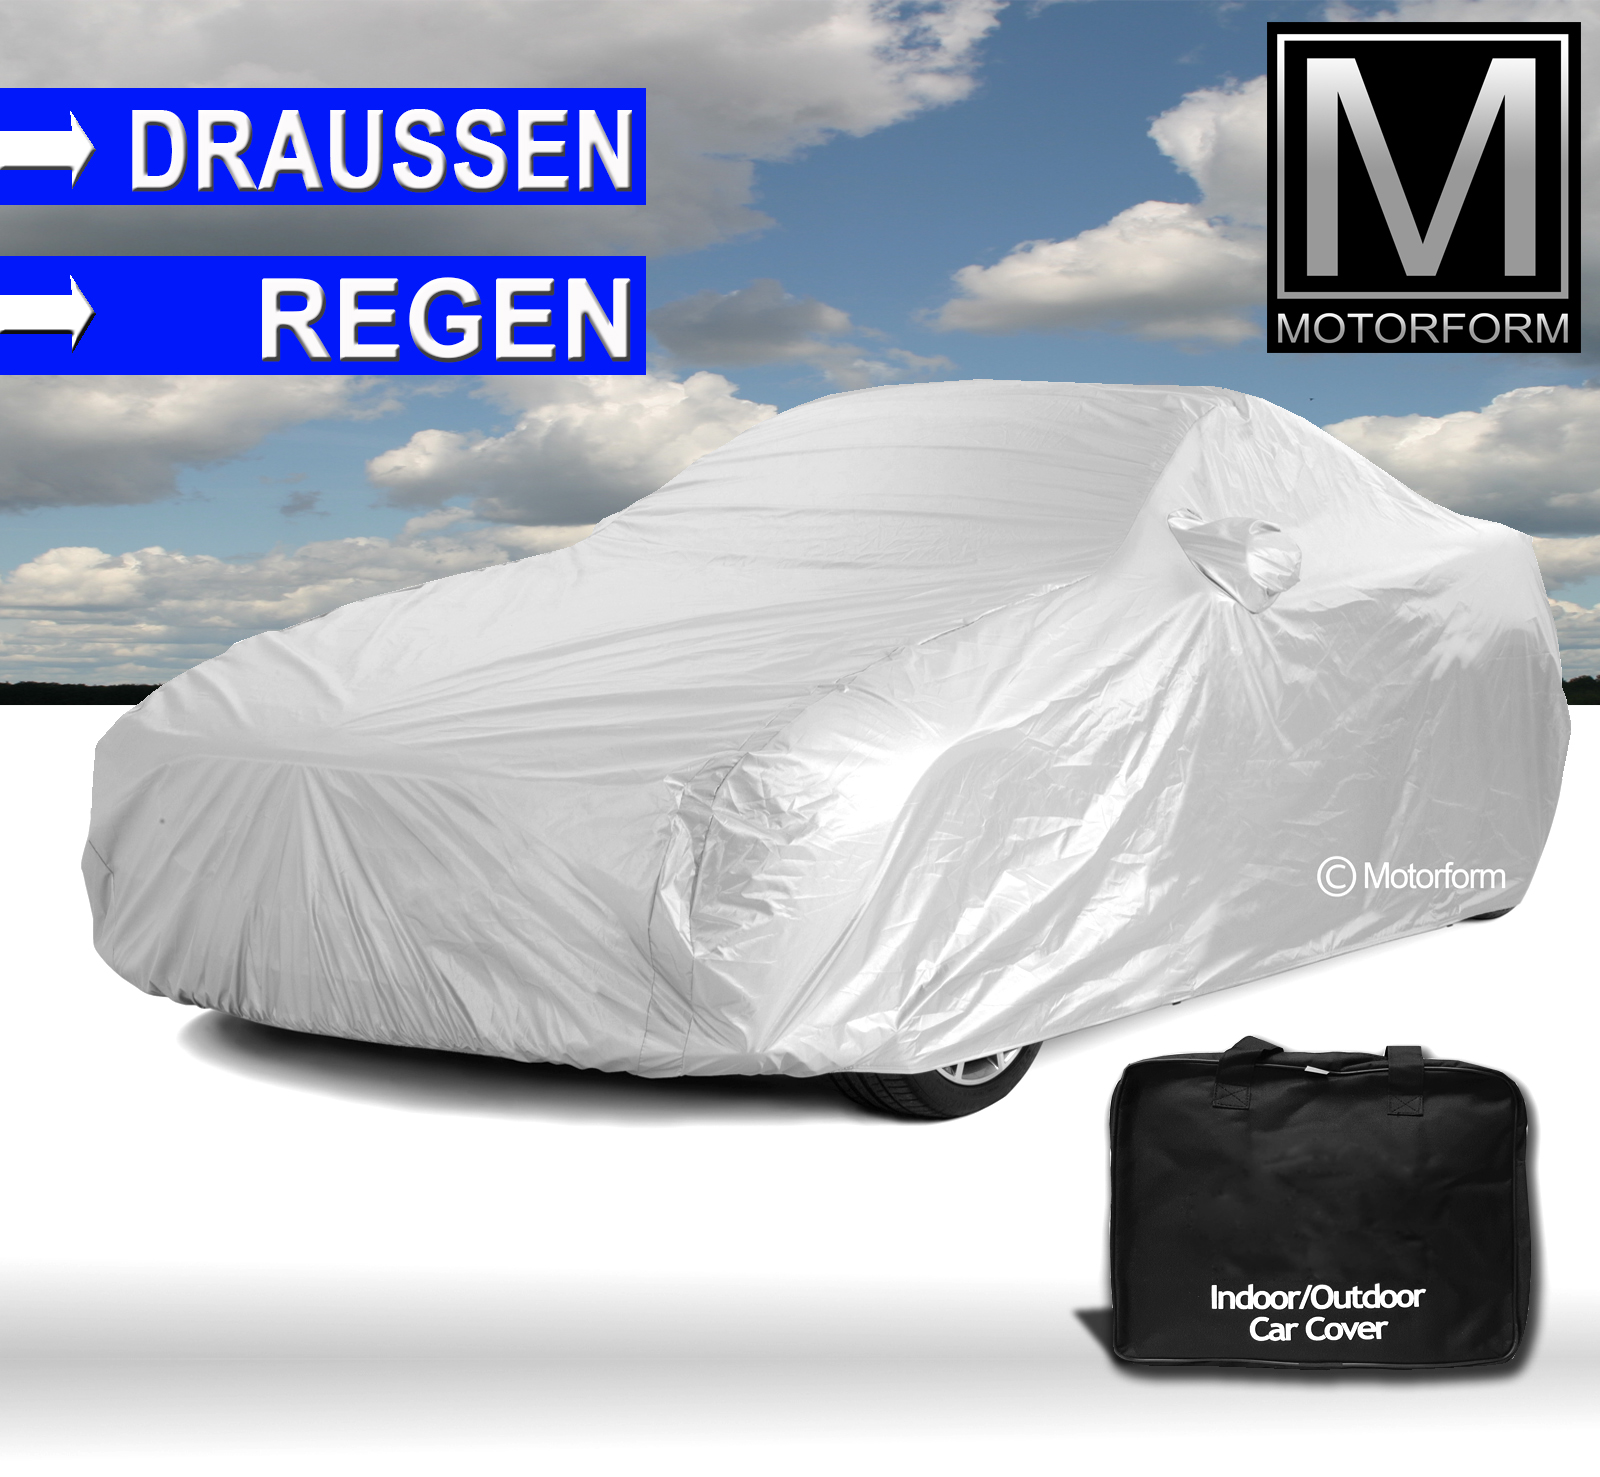 Voyager Outdoor Car Cover for Opel Vectra C (2002-08)